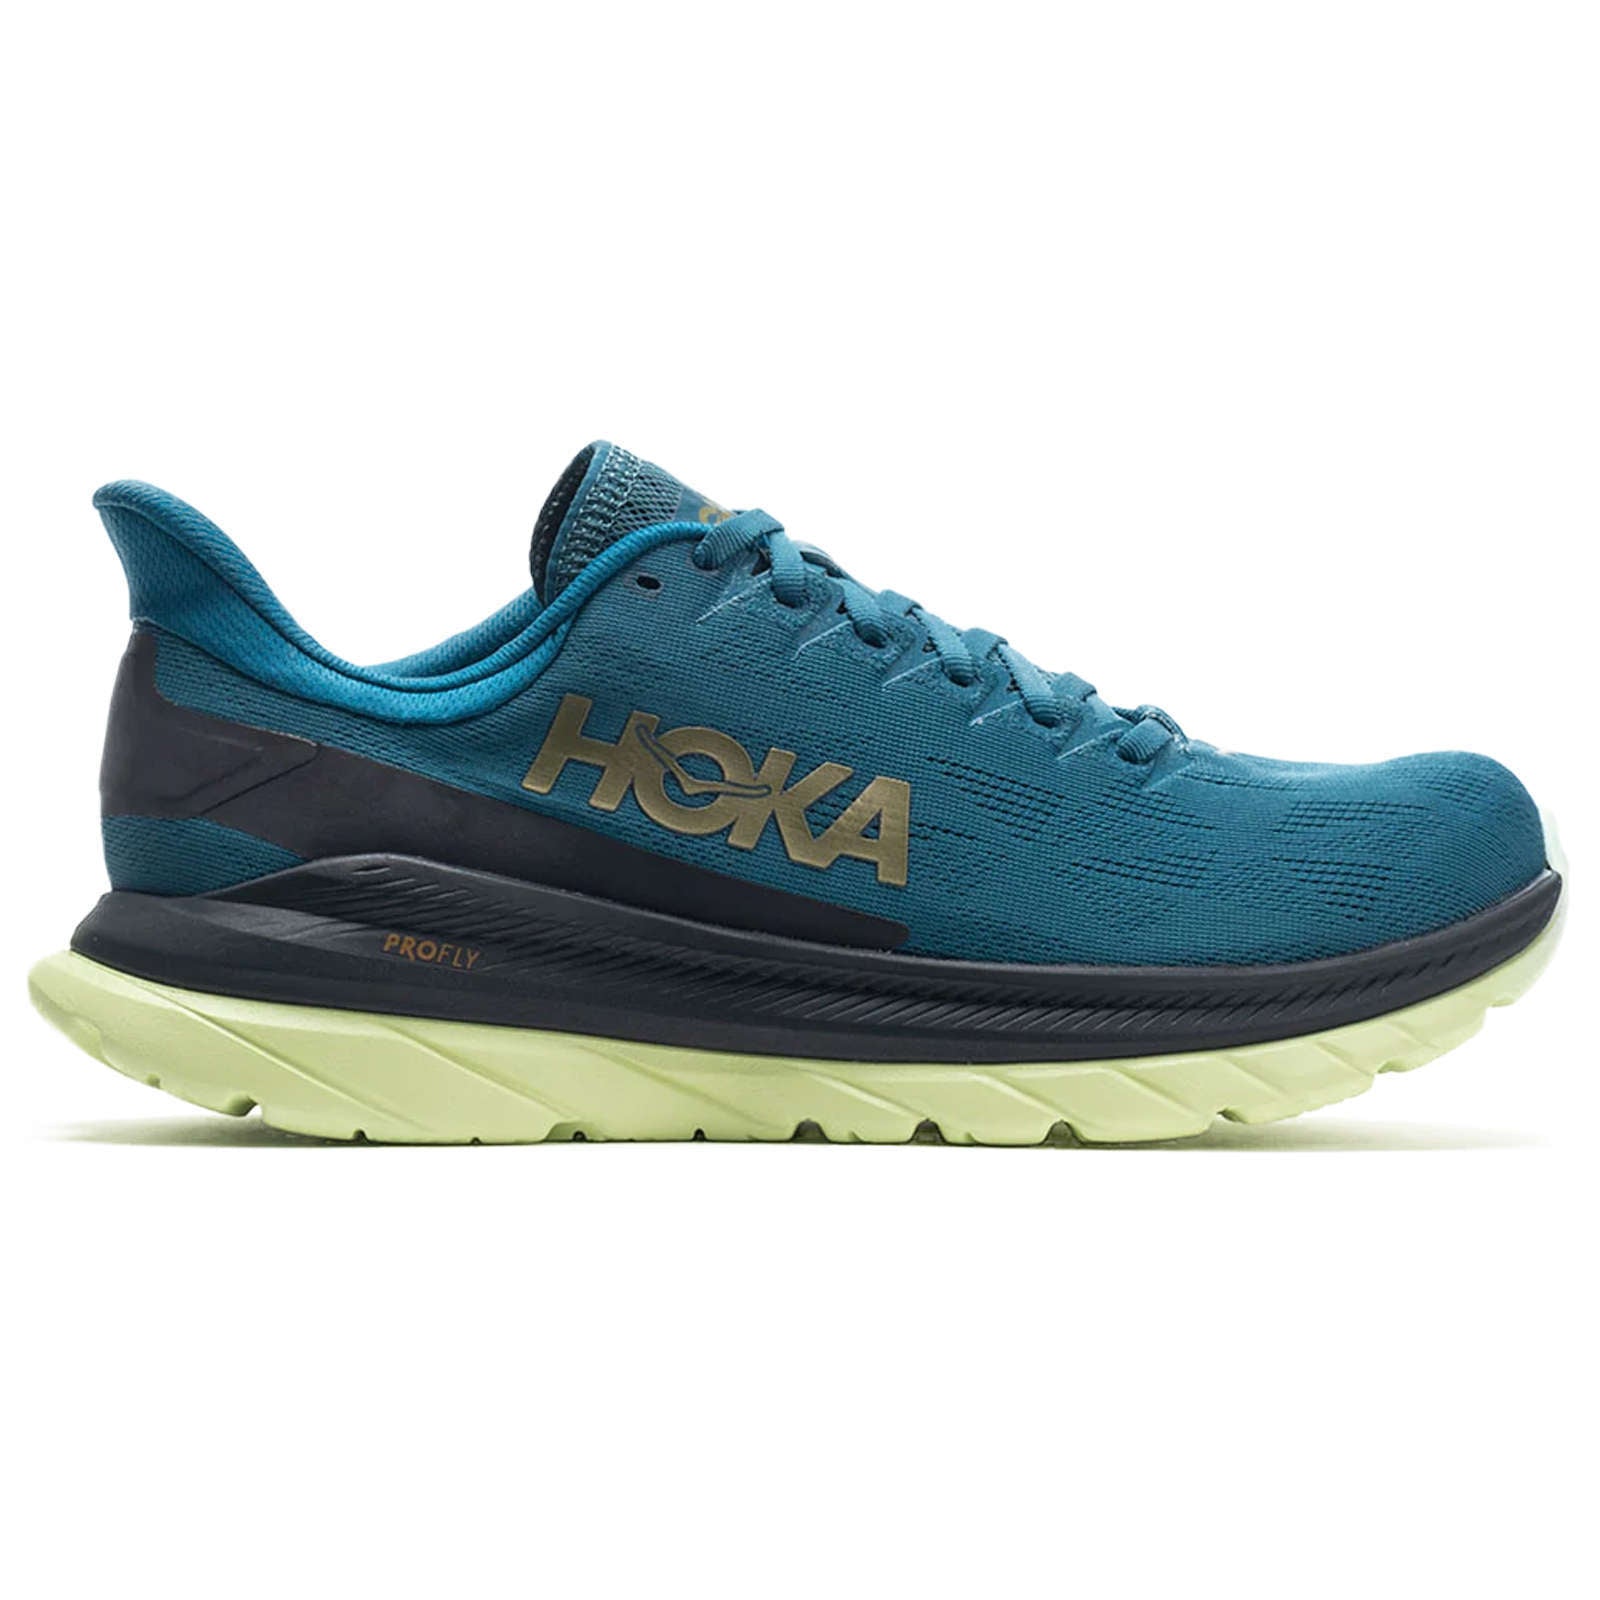 Hoka One One Mach 4 Mesh Men's Low-Top Road Running Trainers#color_blue coral black